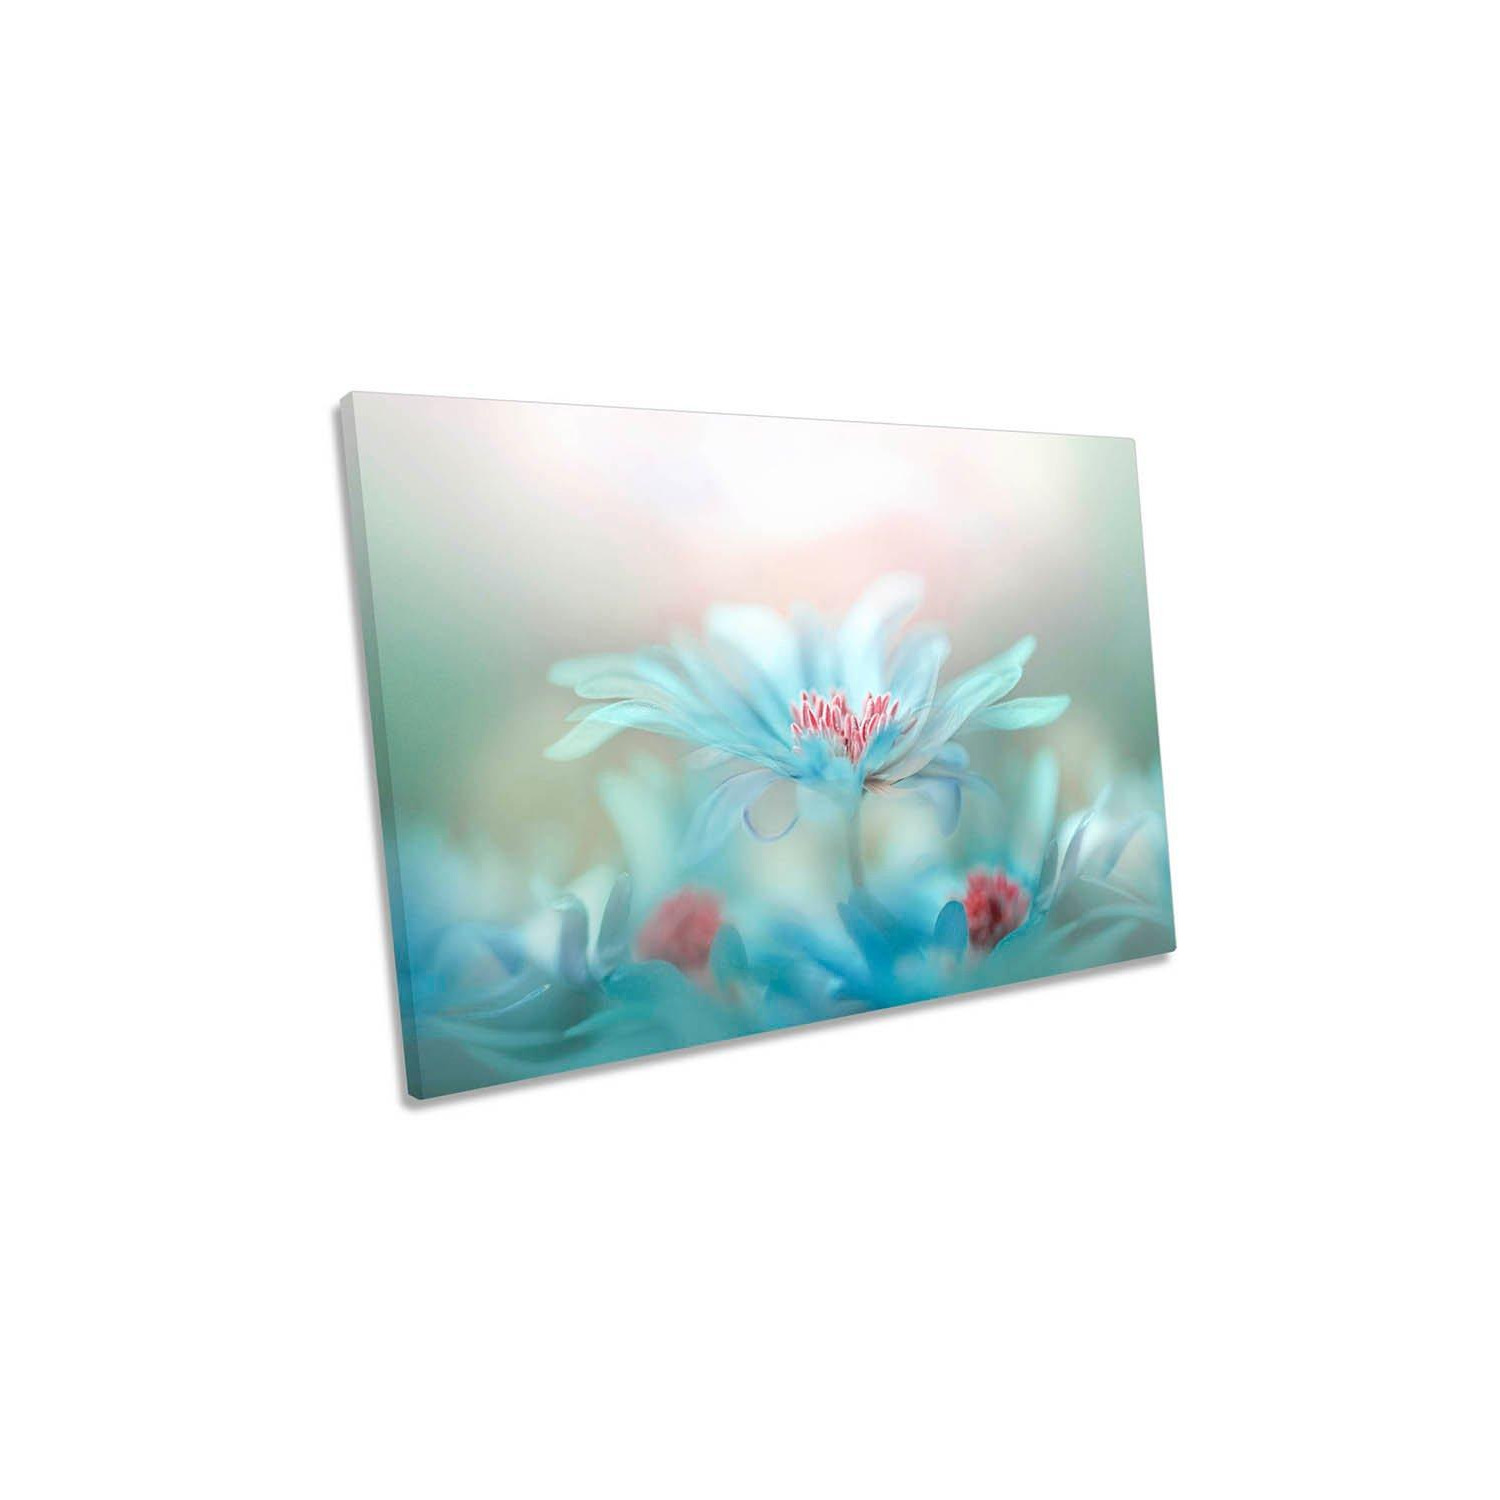 Fantasy Flowers Floral Blue Canvas Wall Art Picture Print - image 1